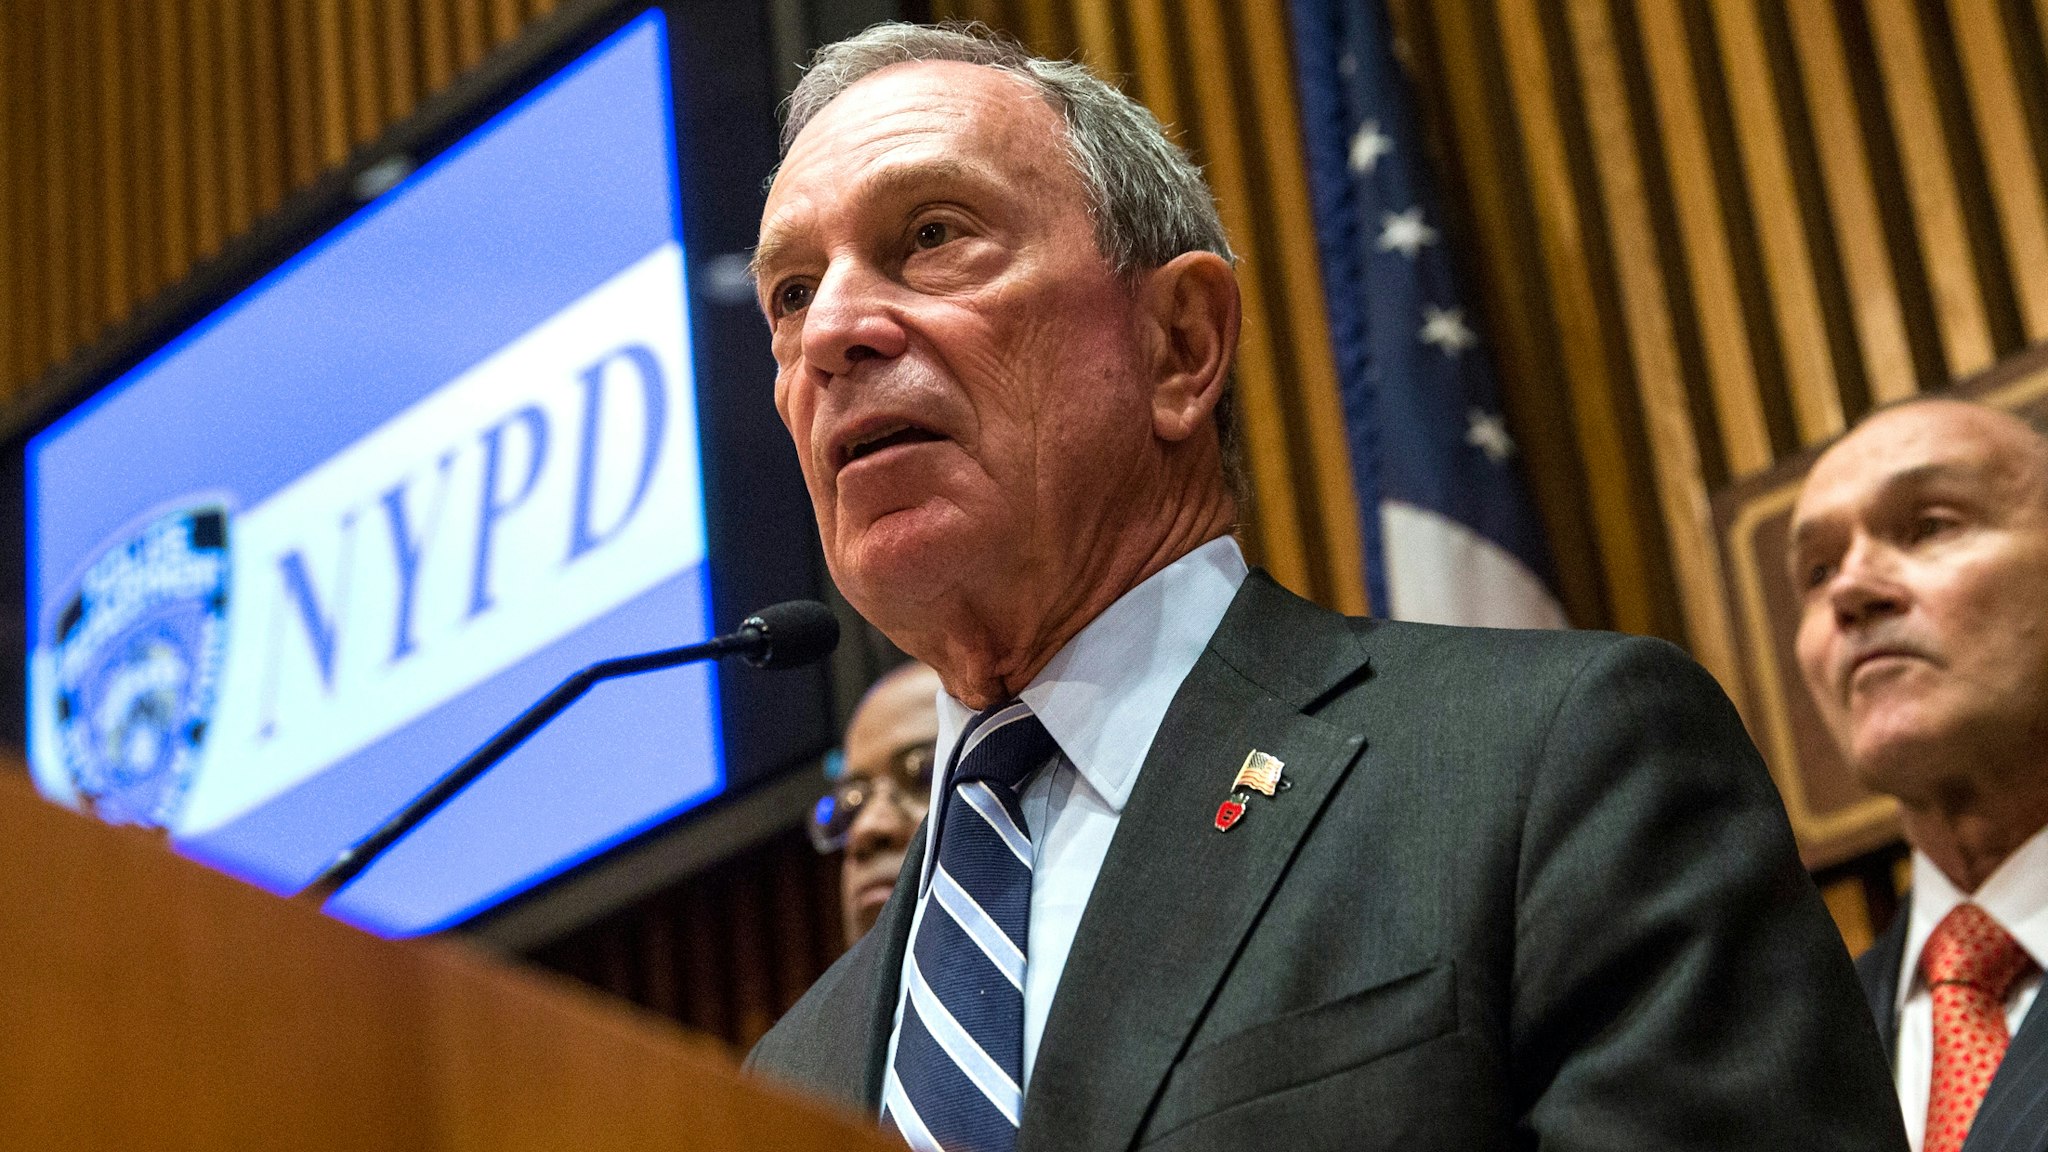 NEW YORK, NY - AUGUST 19: New York City Mayor Michael Bloomberg (C) speaks as New York Police Department (NYPD) Commissioner Ray Kelly (R) listens during a press conference to announce an operation that seized the largest number of illegal guns in the city's history on August 19, 2013 in New York City. The operation, which involved an undercover agent buying guns that were smuggled from North Carolina and South Carolina, yeilded over 250 guns. 19 people have been charged in the operation.